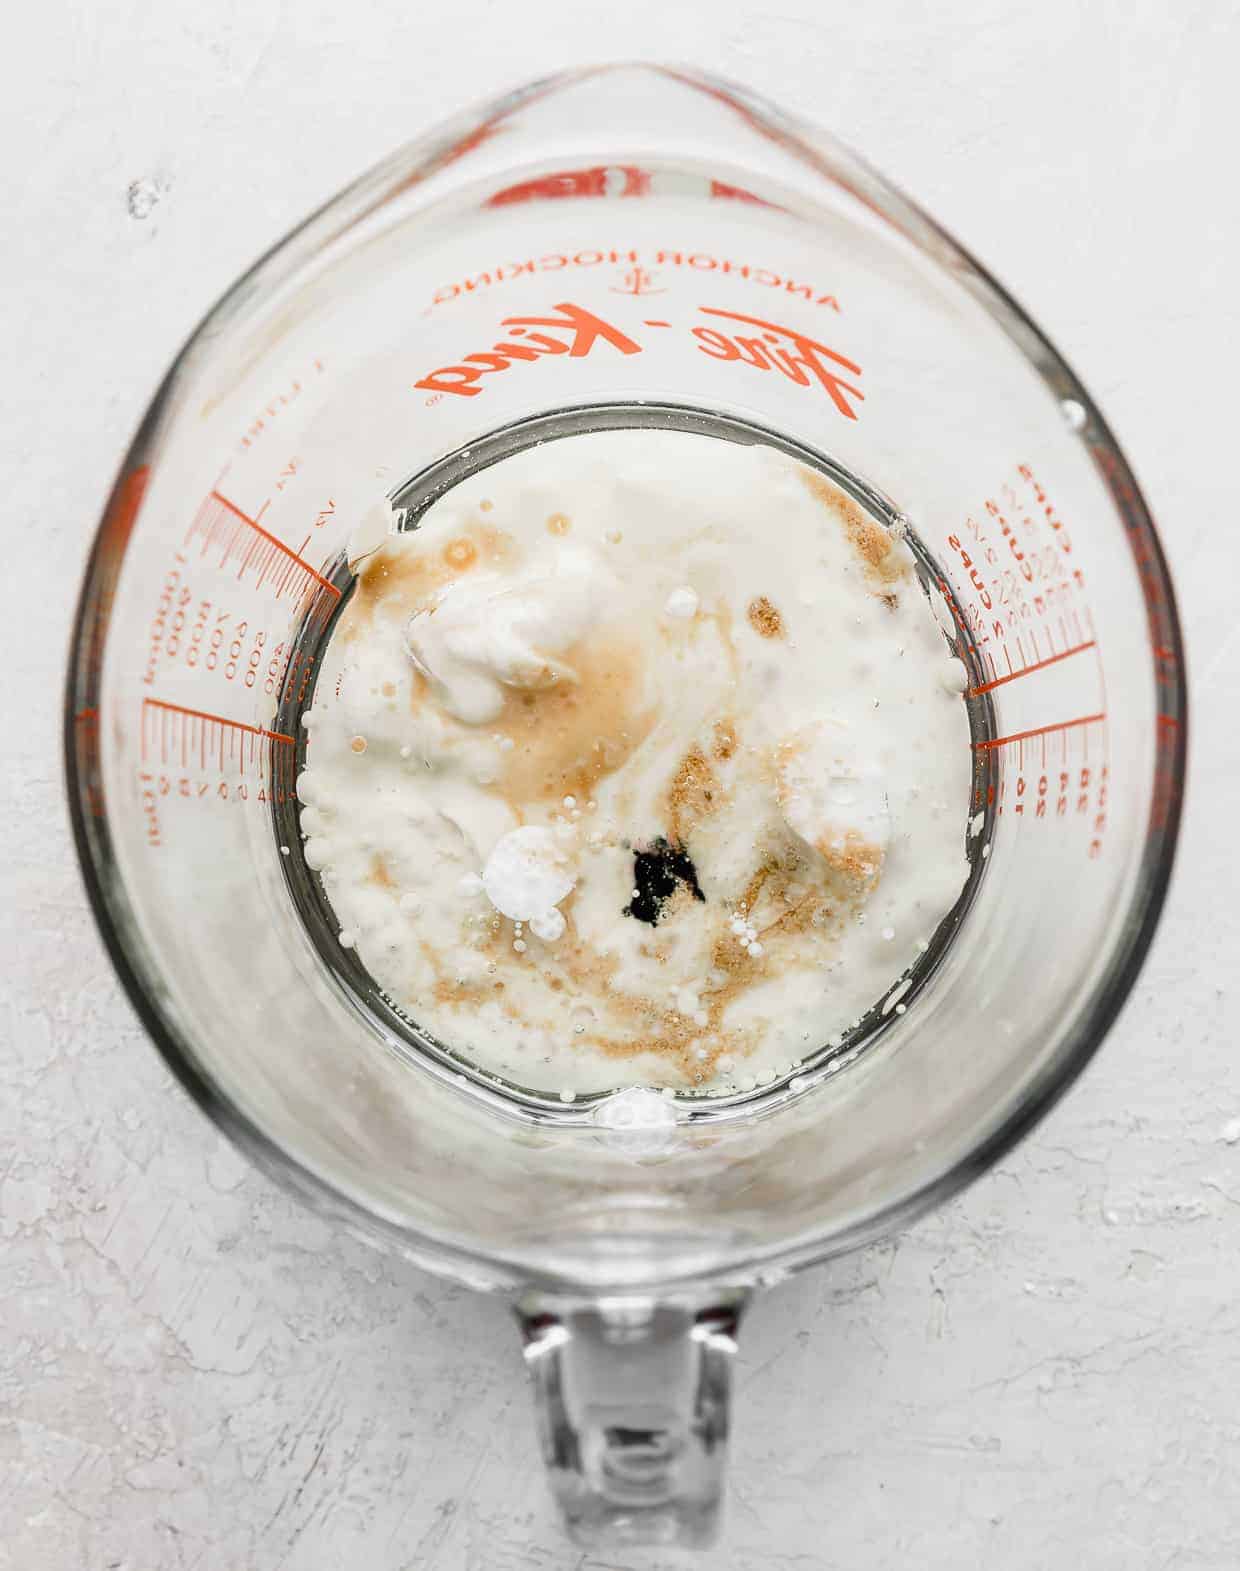 A glass measuring cup with wet ingredients used to make Black Velvet Cupcakes.